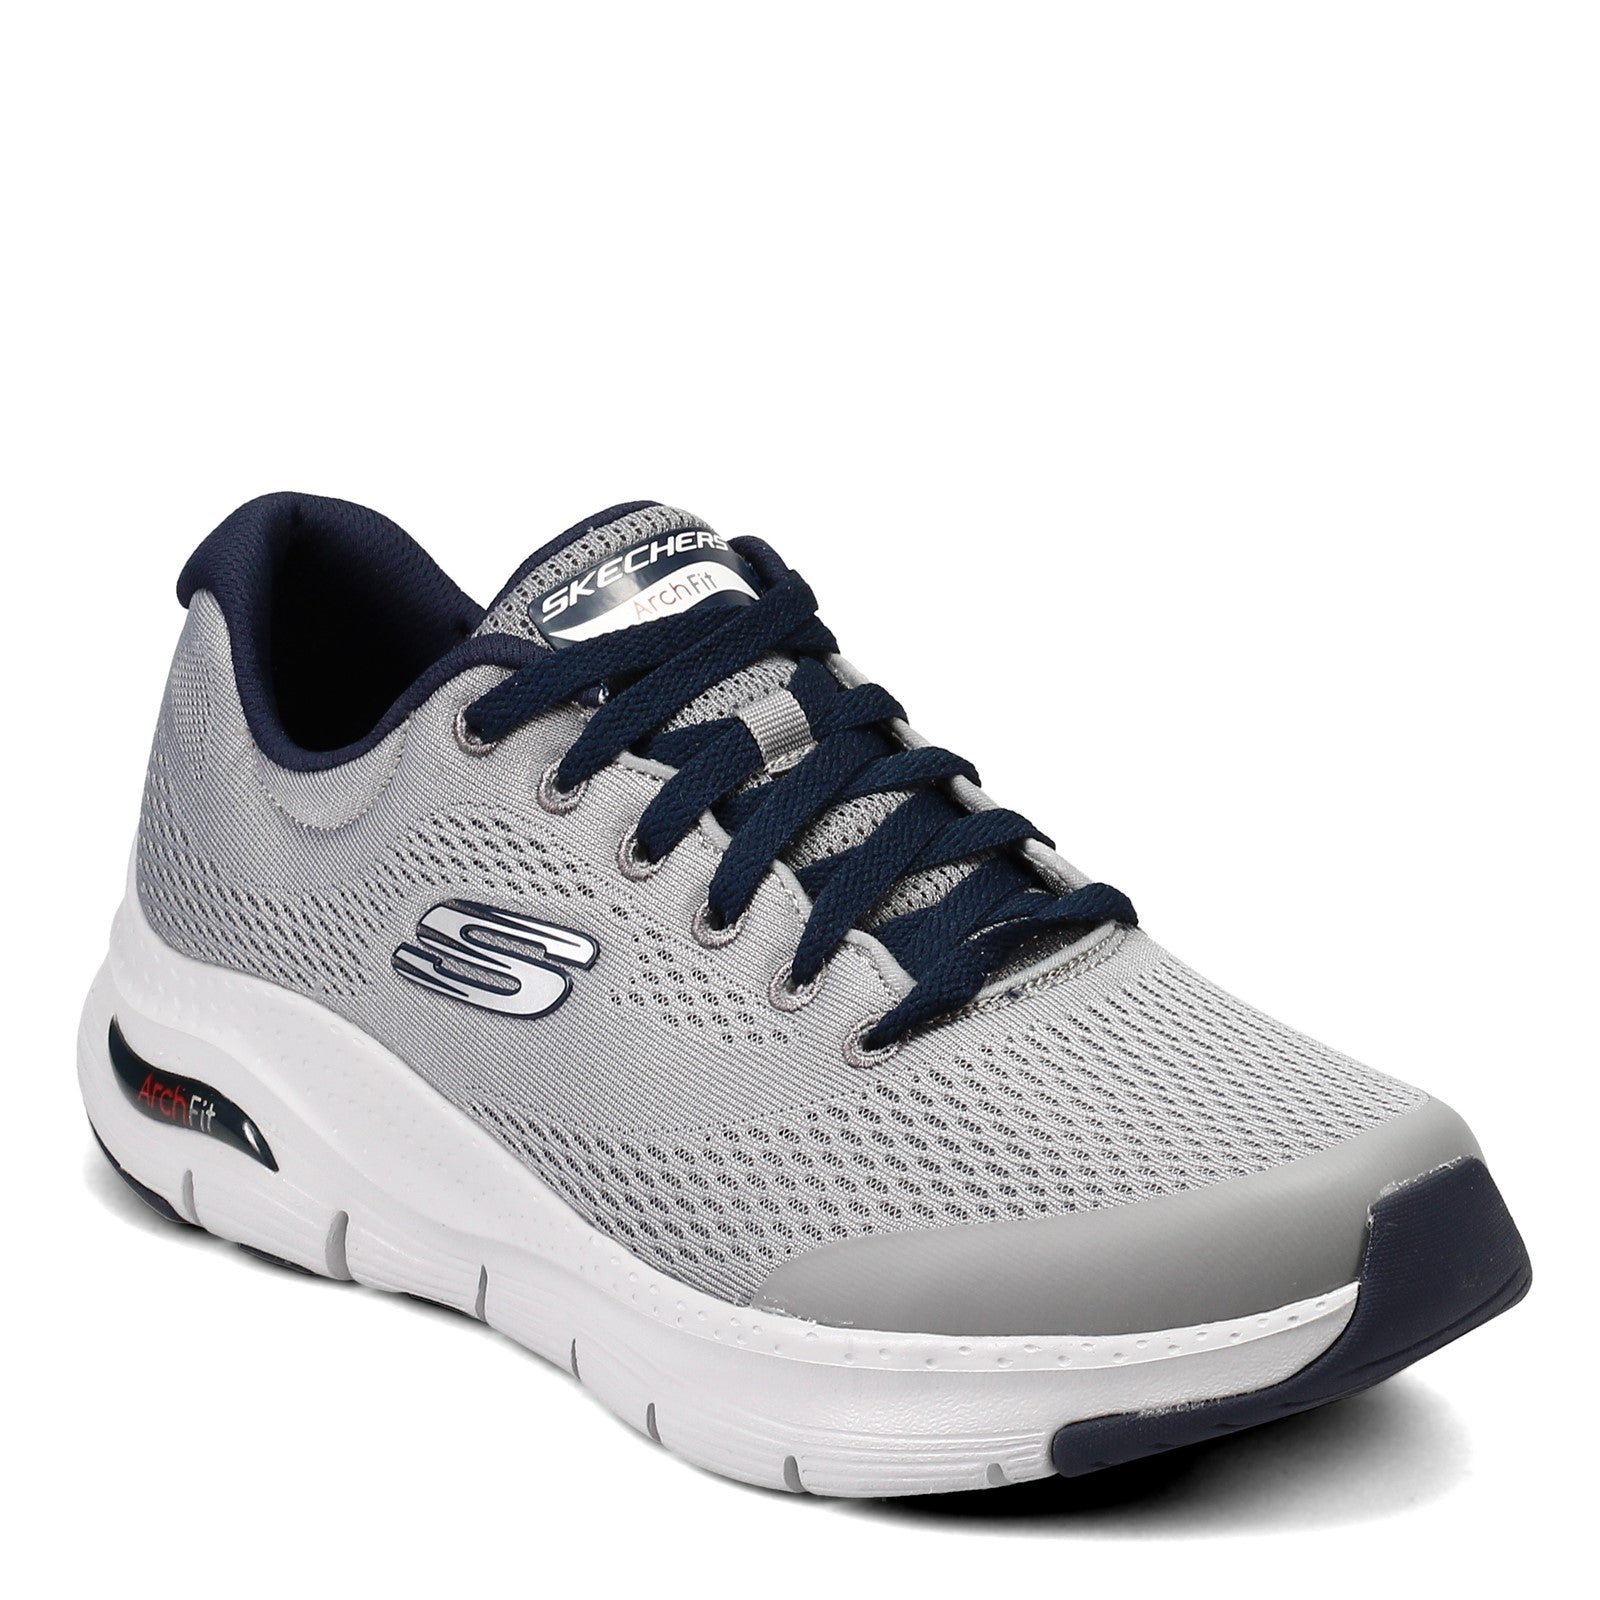 MENS SKECHERS TRAINERS ARCH FIT MEMORY FOAM FITNESS WALKING RUNNING SHOES  SIZE